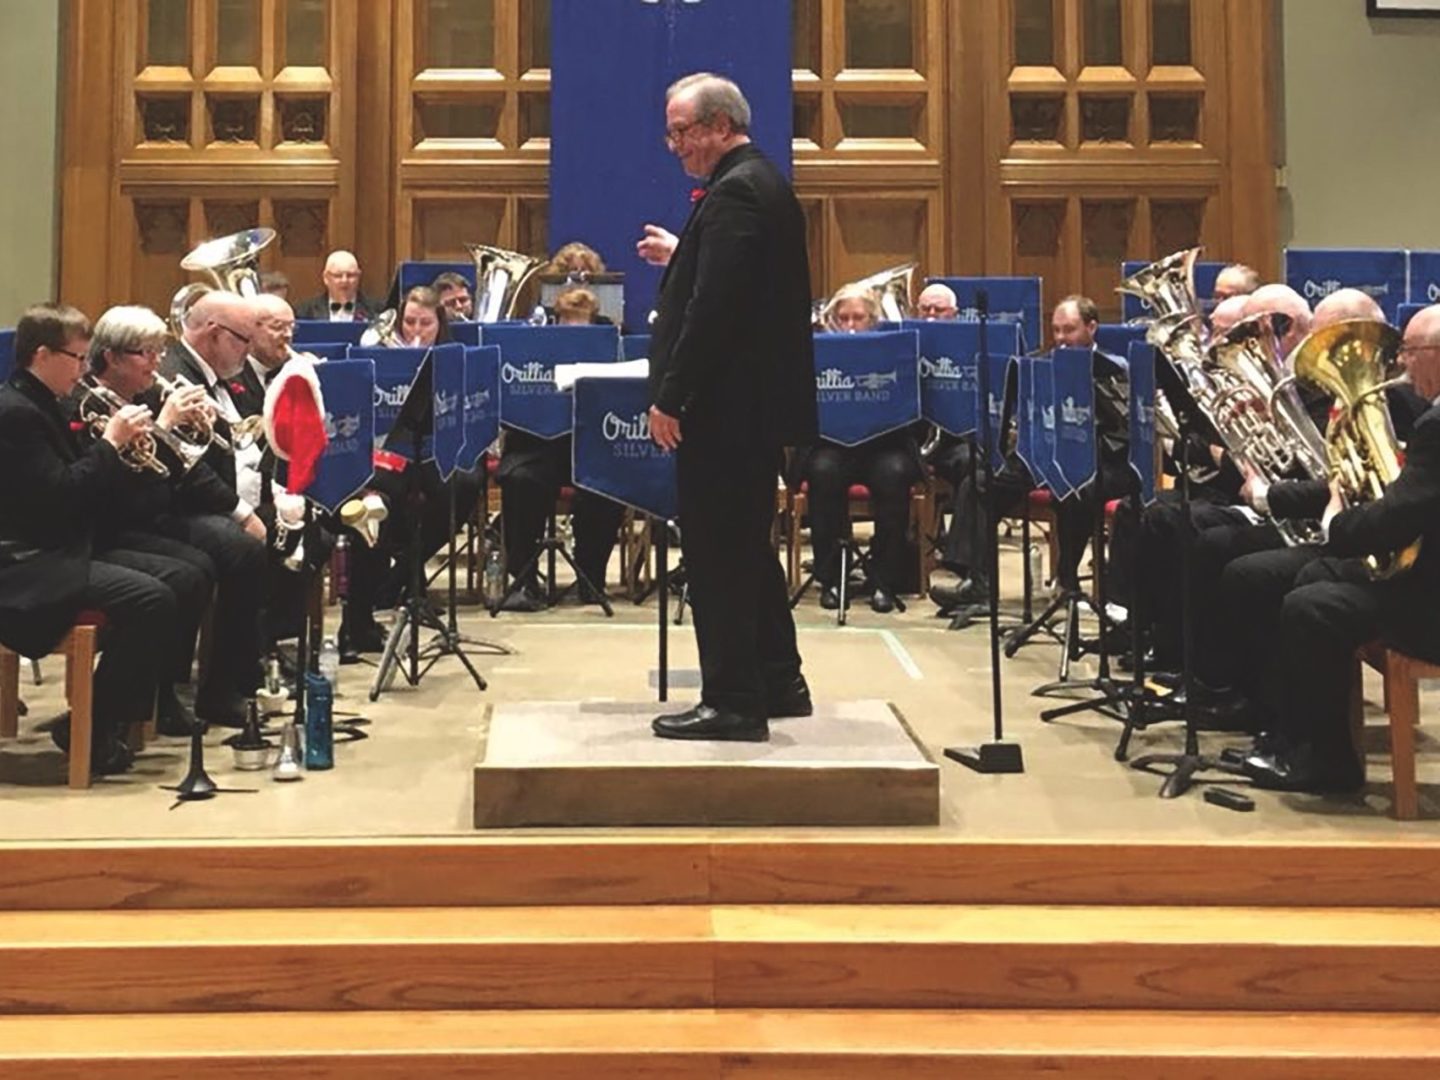 The Orillia Silver Band on stage at St. Paul’s United in December 2017. (Photo courtesy St. Paul's United)